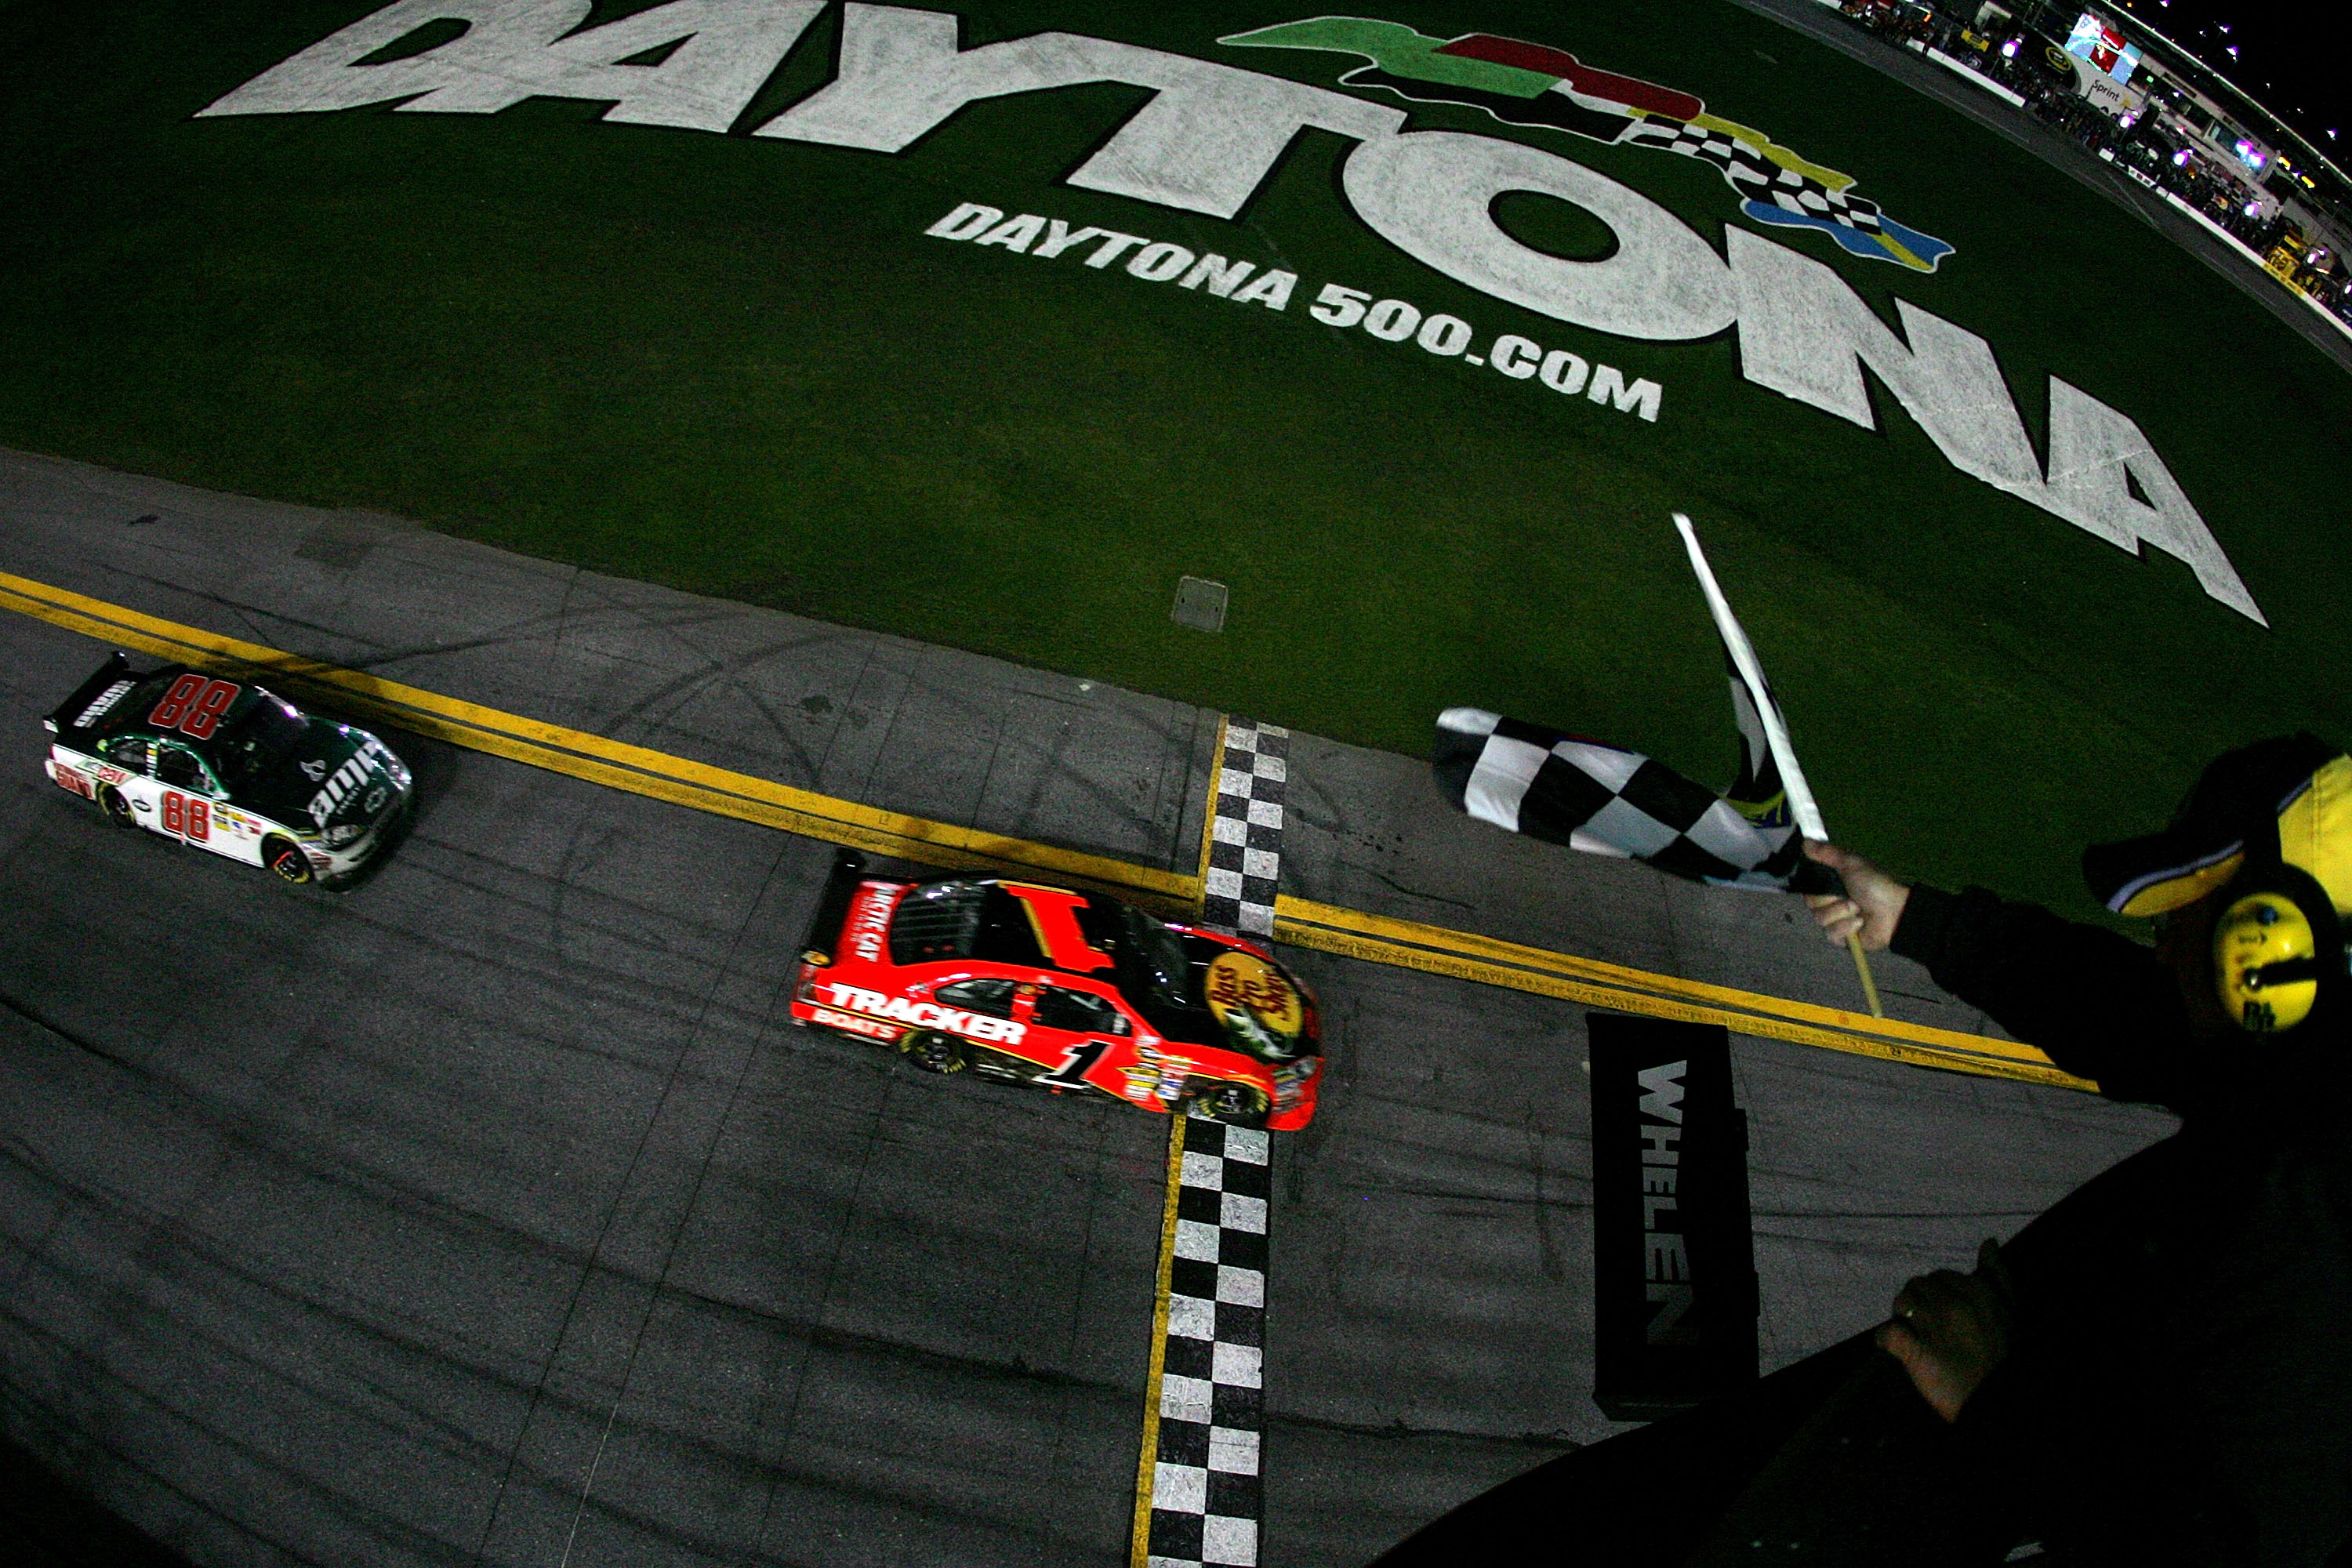 DAYTONA BEACH, FL - FEBRUARY 14:  Jamie McMurray, driver of the #1 Bass Pro Shops/Tracker Boats Chevrolet, crosses the finish line to win the the NASCAR Sprint Cup Series Daytona 500 followed by Dale Earnhardt Jr., driver of the #88 AMP Energy/National Gu